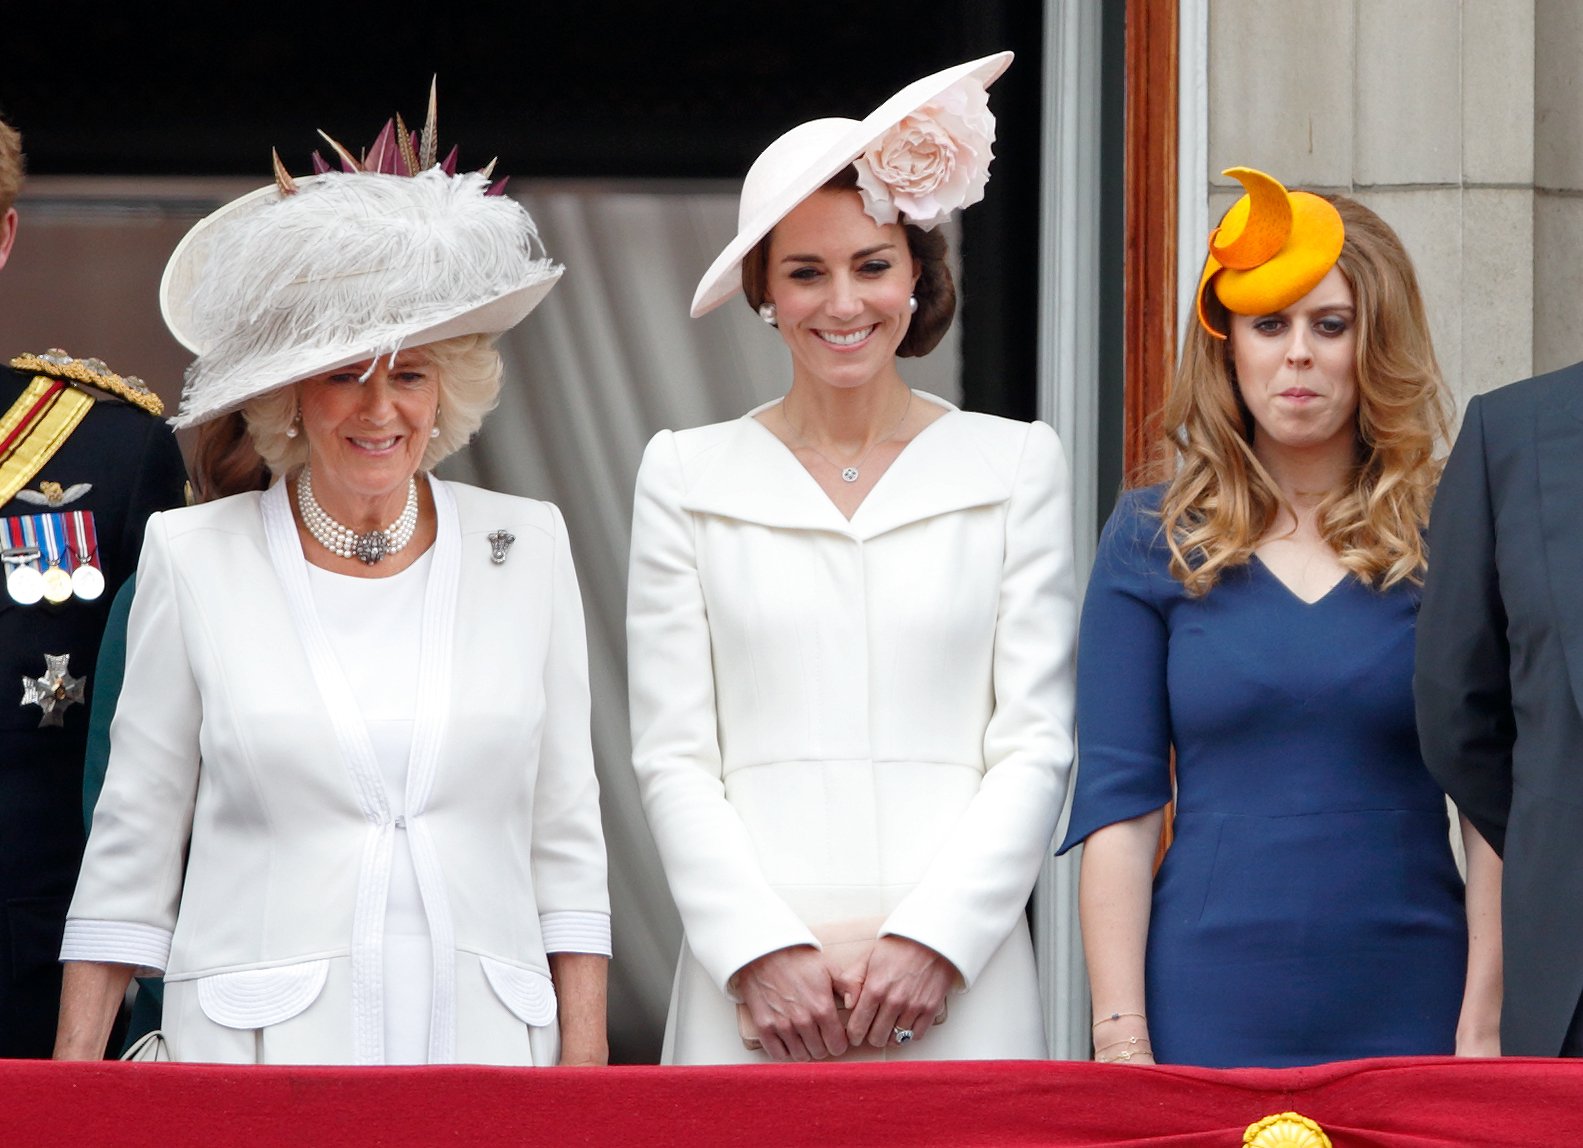 Kate Middelton and Camilla, Duchess of Cornwall with the Royal Family in London in 2016. |  Source: Getty Images